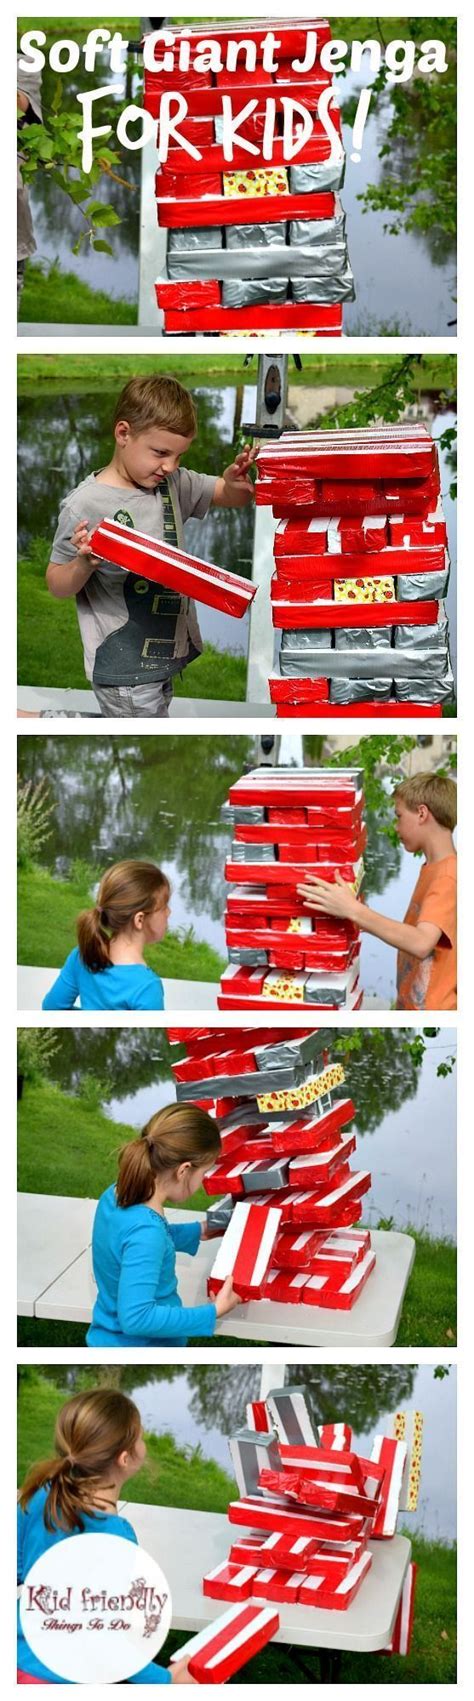 Painting the ends of each block with paint that can withstand outside elements is the icing on the cake! A DIY Awesome Soft Giant Jenga Game For Kids | Giant jenga, Backyard games kids, Backyard games diy